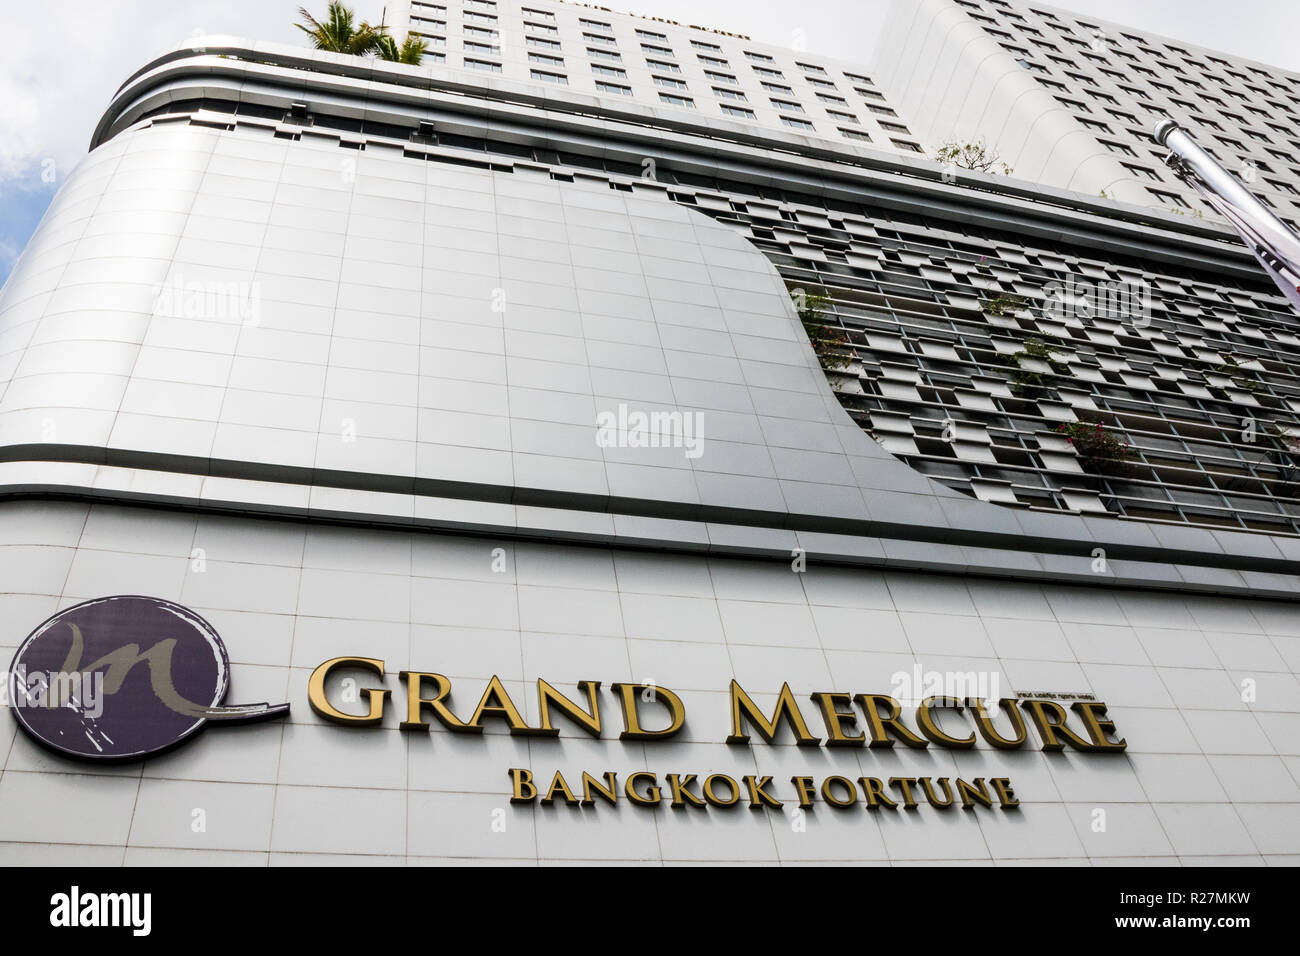 Bangkok, Thailand - 5th October 2018: The Bangkok Fortune Grand Mercure hotel. The hotel is part of the Accor group. Stock Photo